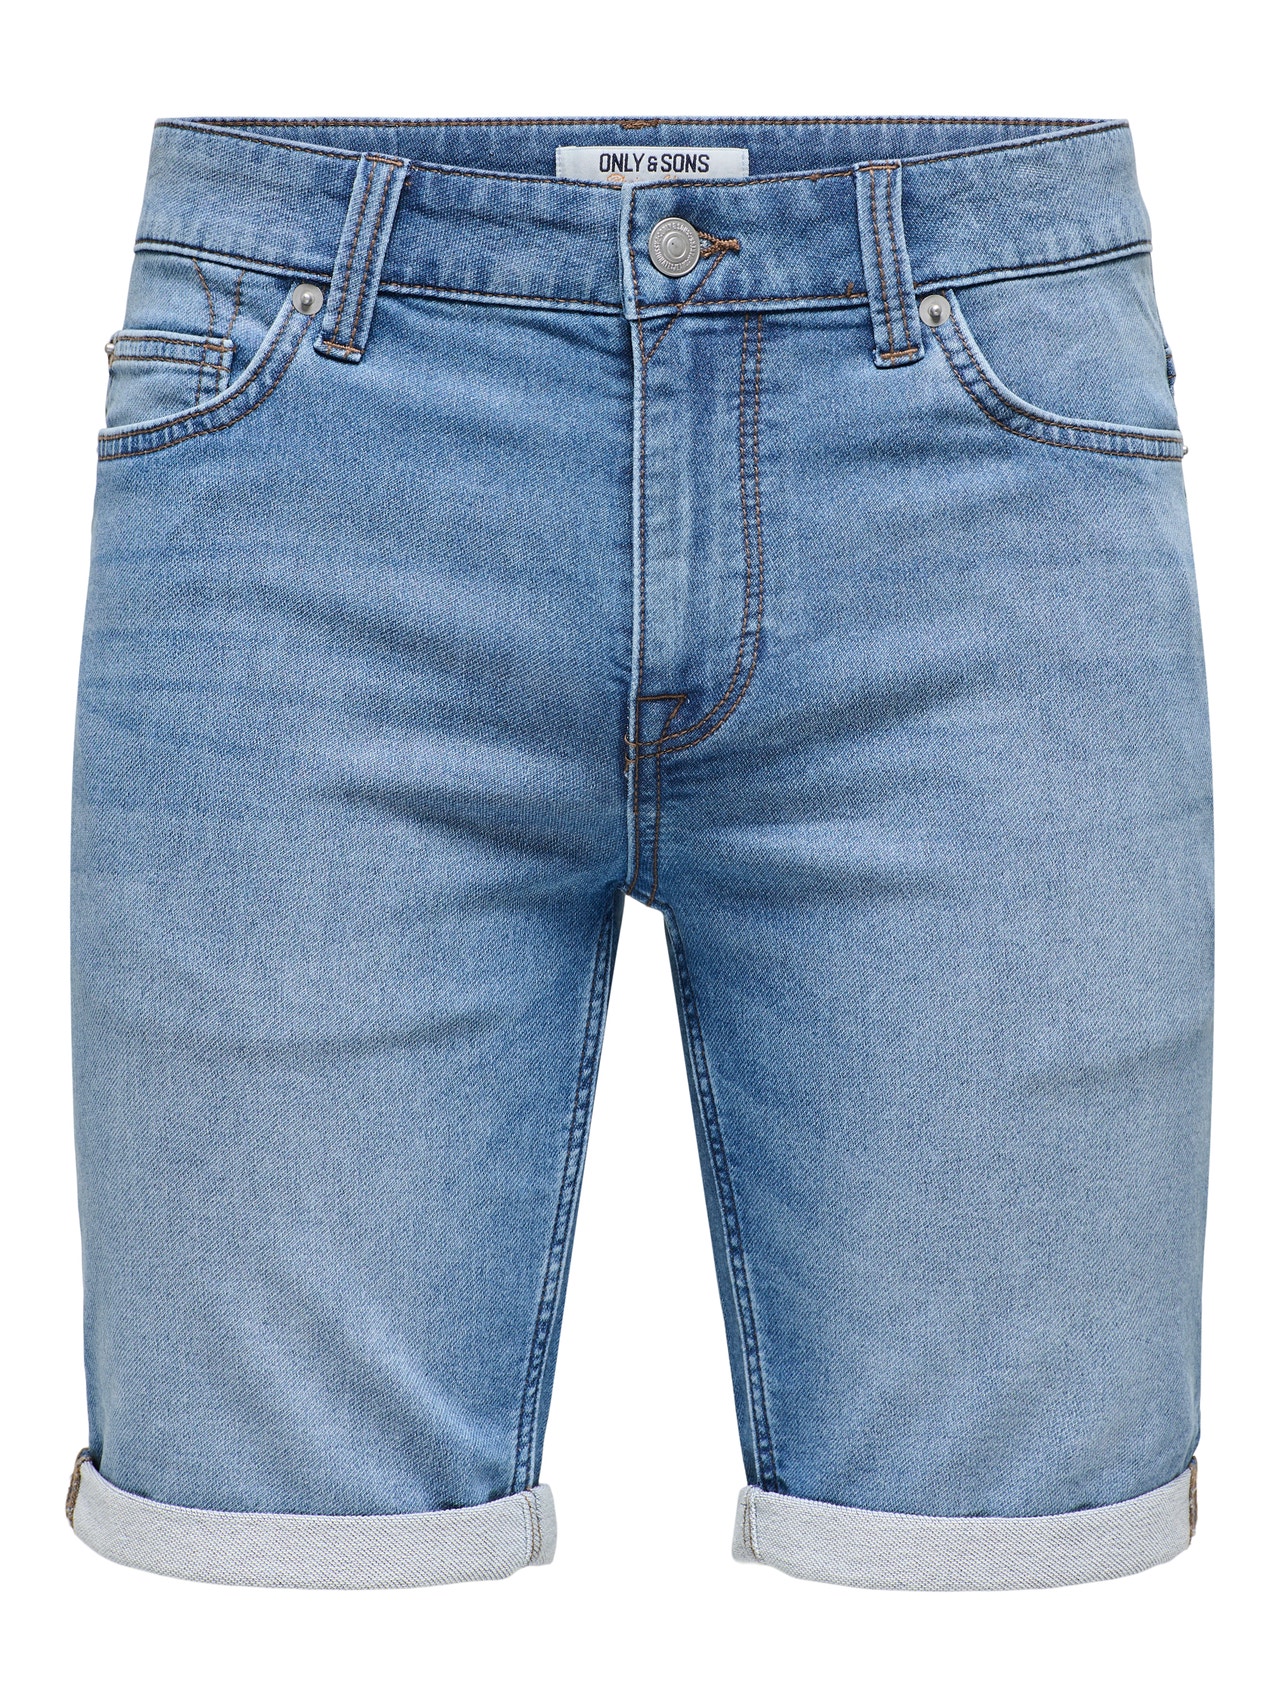 ONLY & SONS Shorts Regular Fit Taille moyenne -Blue Denim - 22018584